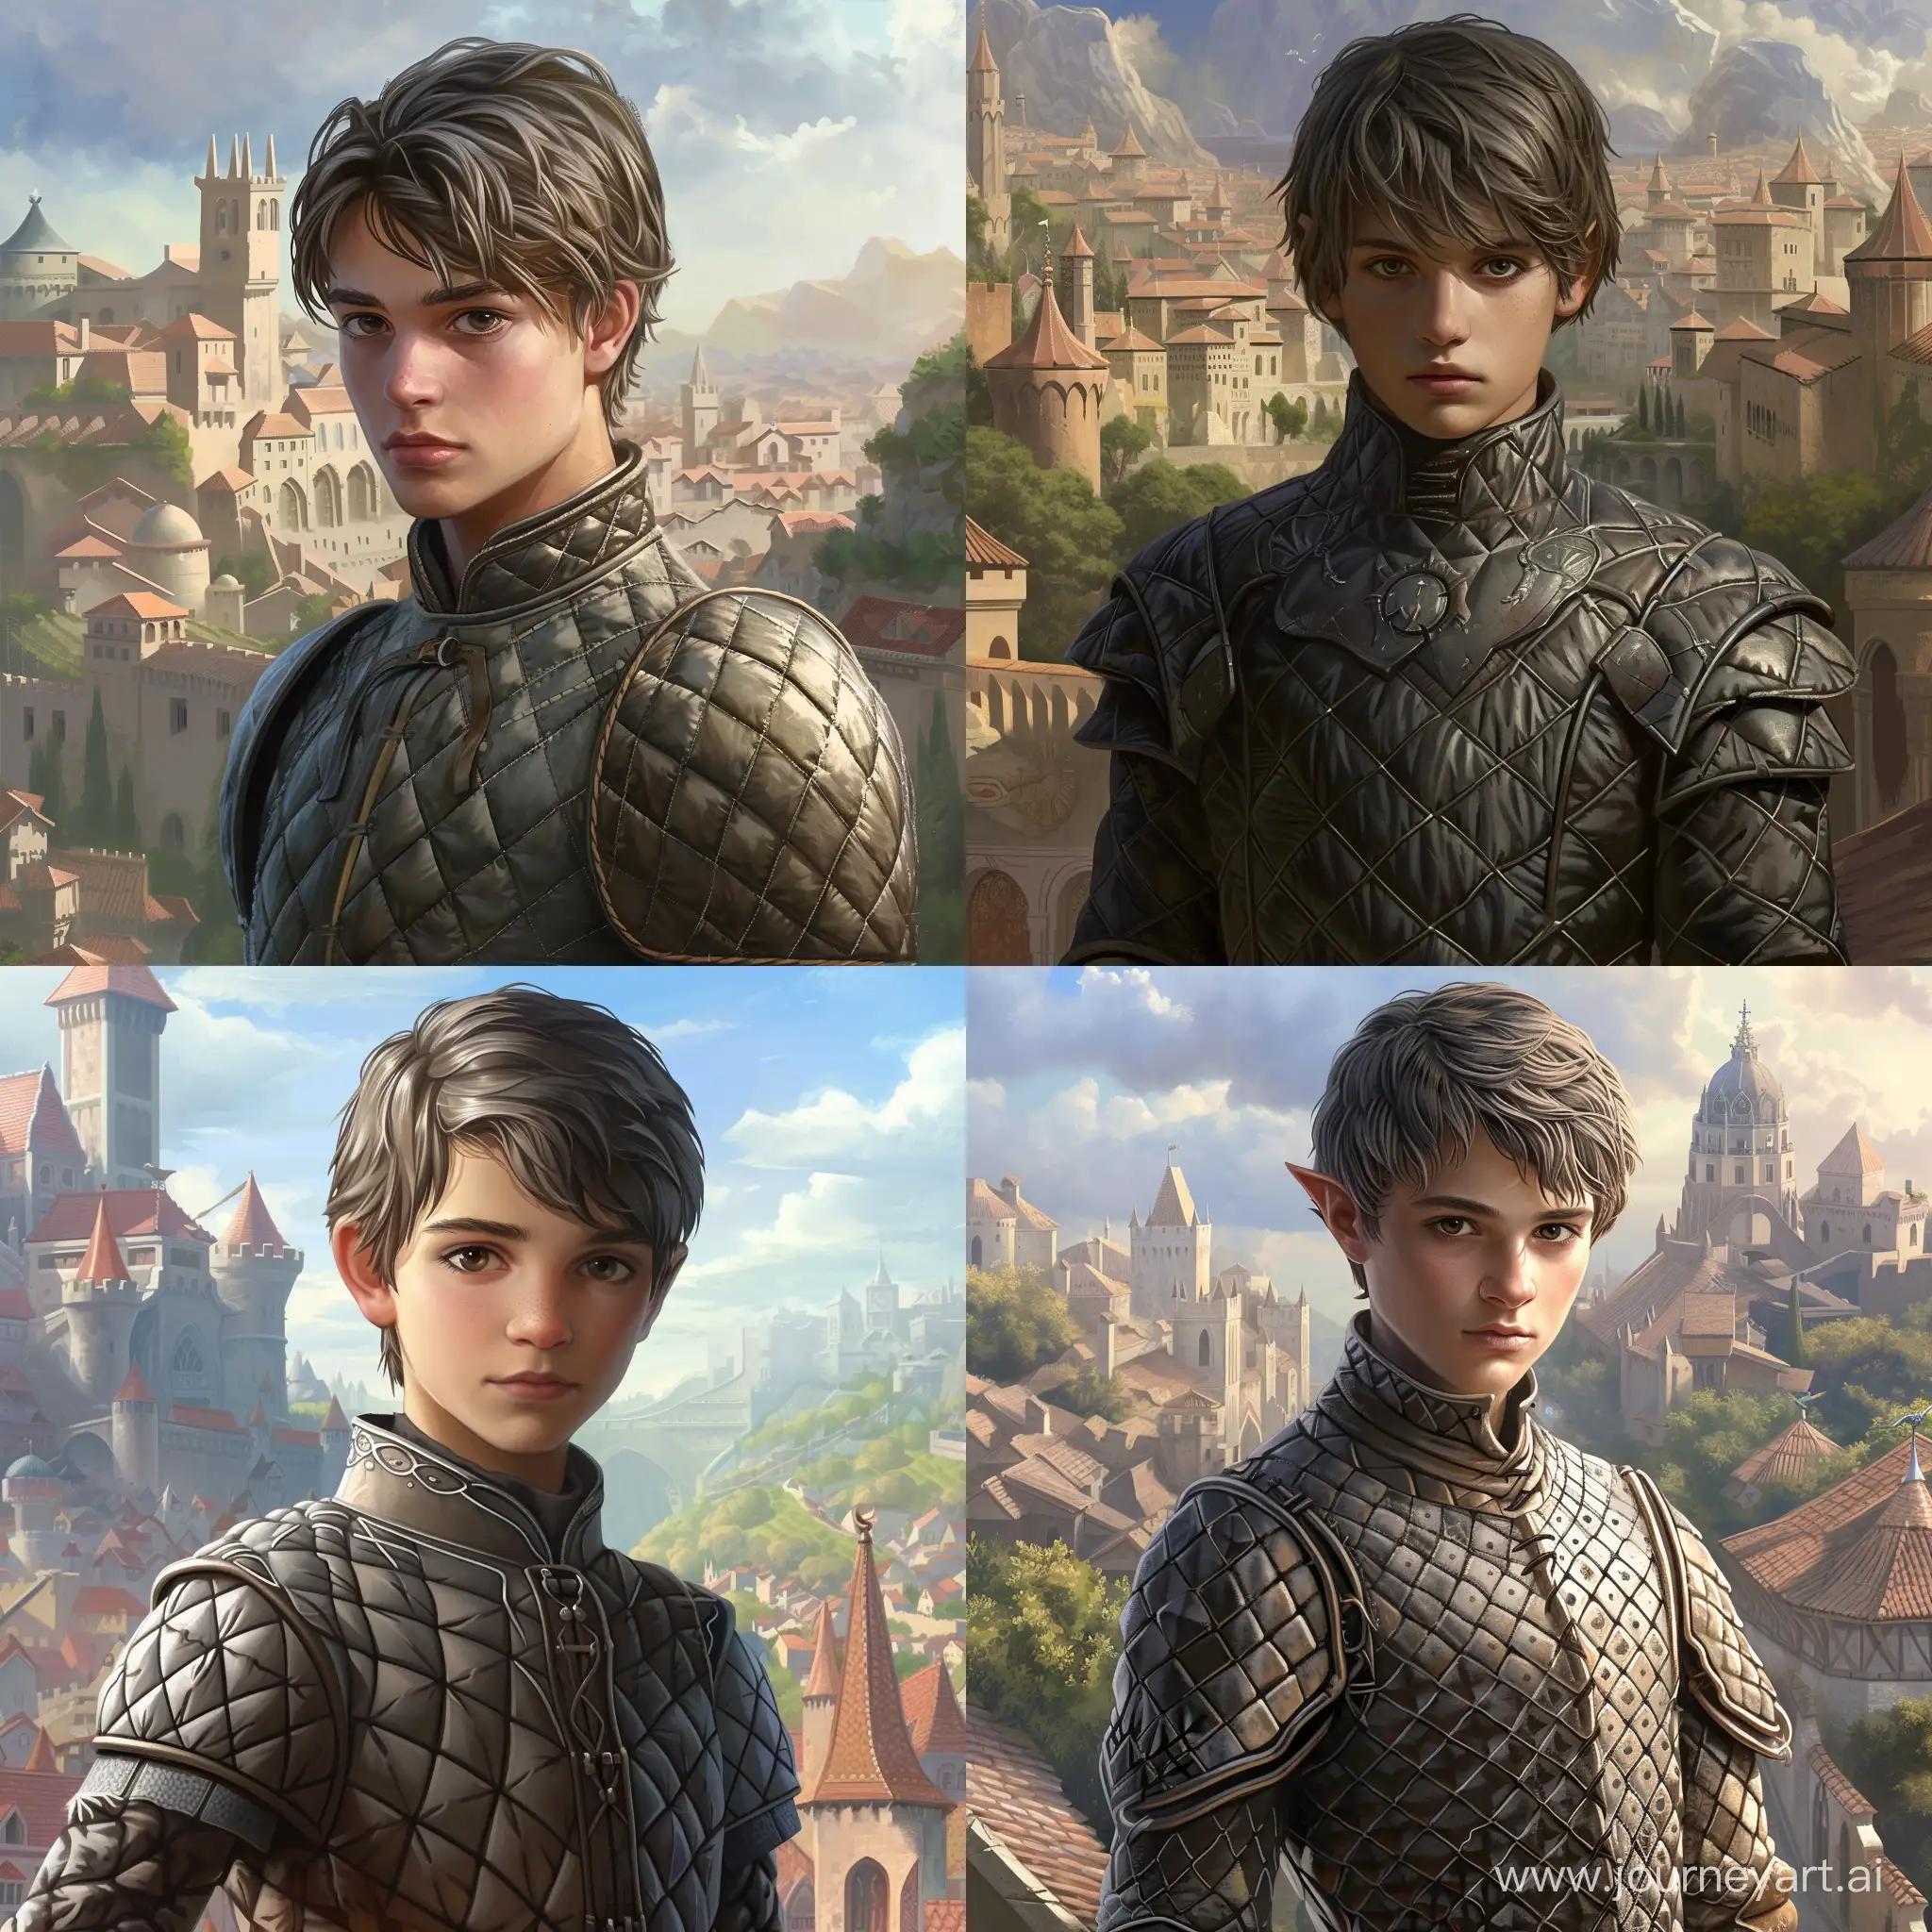 A young man of 15 years old in a fantasy setting. He is wearing quilted armor. Brown hair and gray irises. Slightly shorter than the average teenager his age. In the background is a medieval city.